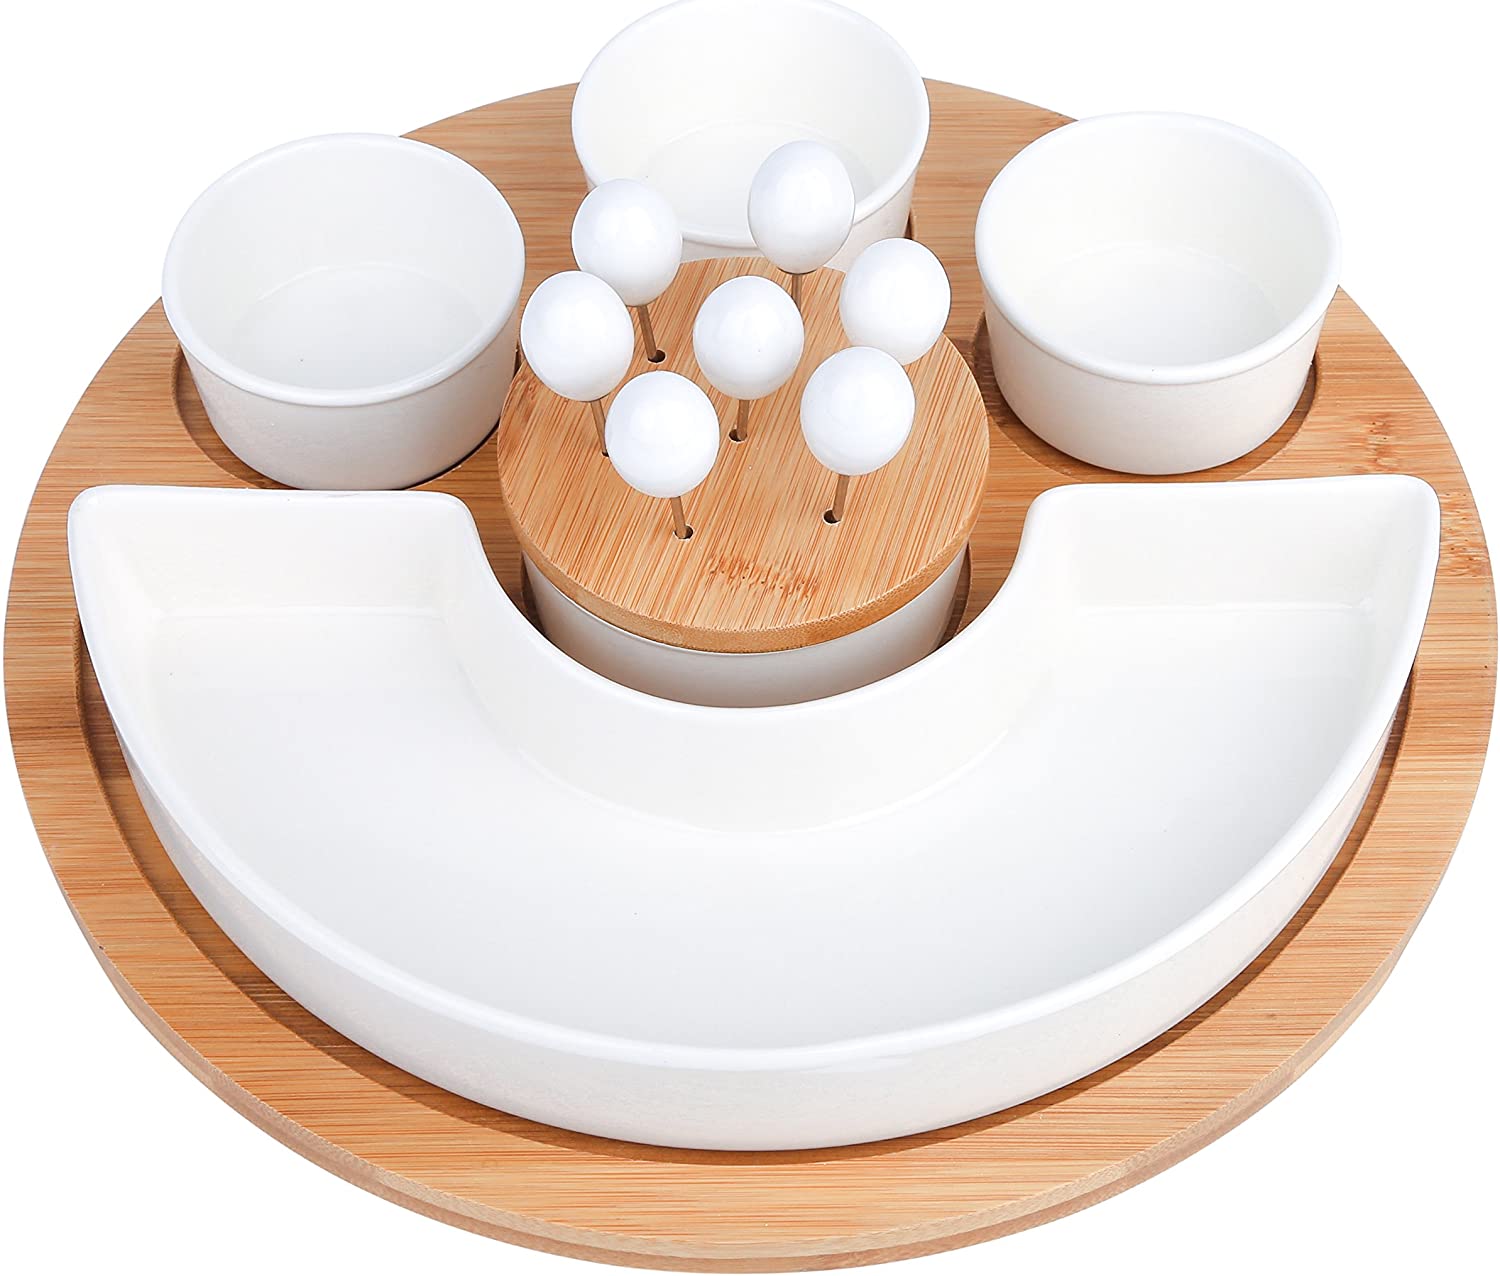 vancasso Porcelain snack bowls with 3 dip bowls, 7 skewers and bamboo tray, dessert bowls, serving bowls set.